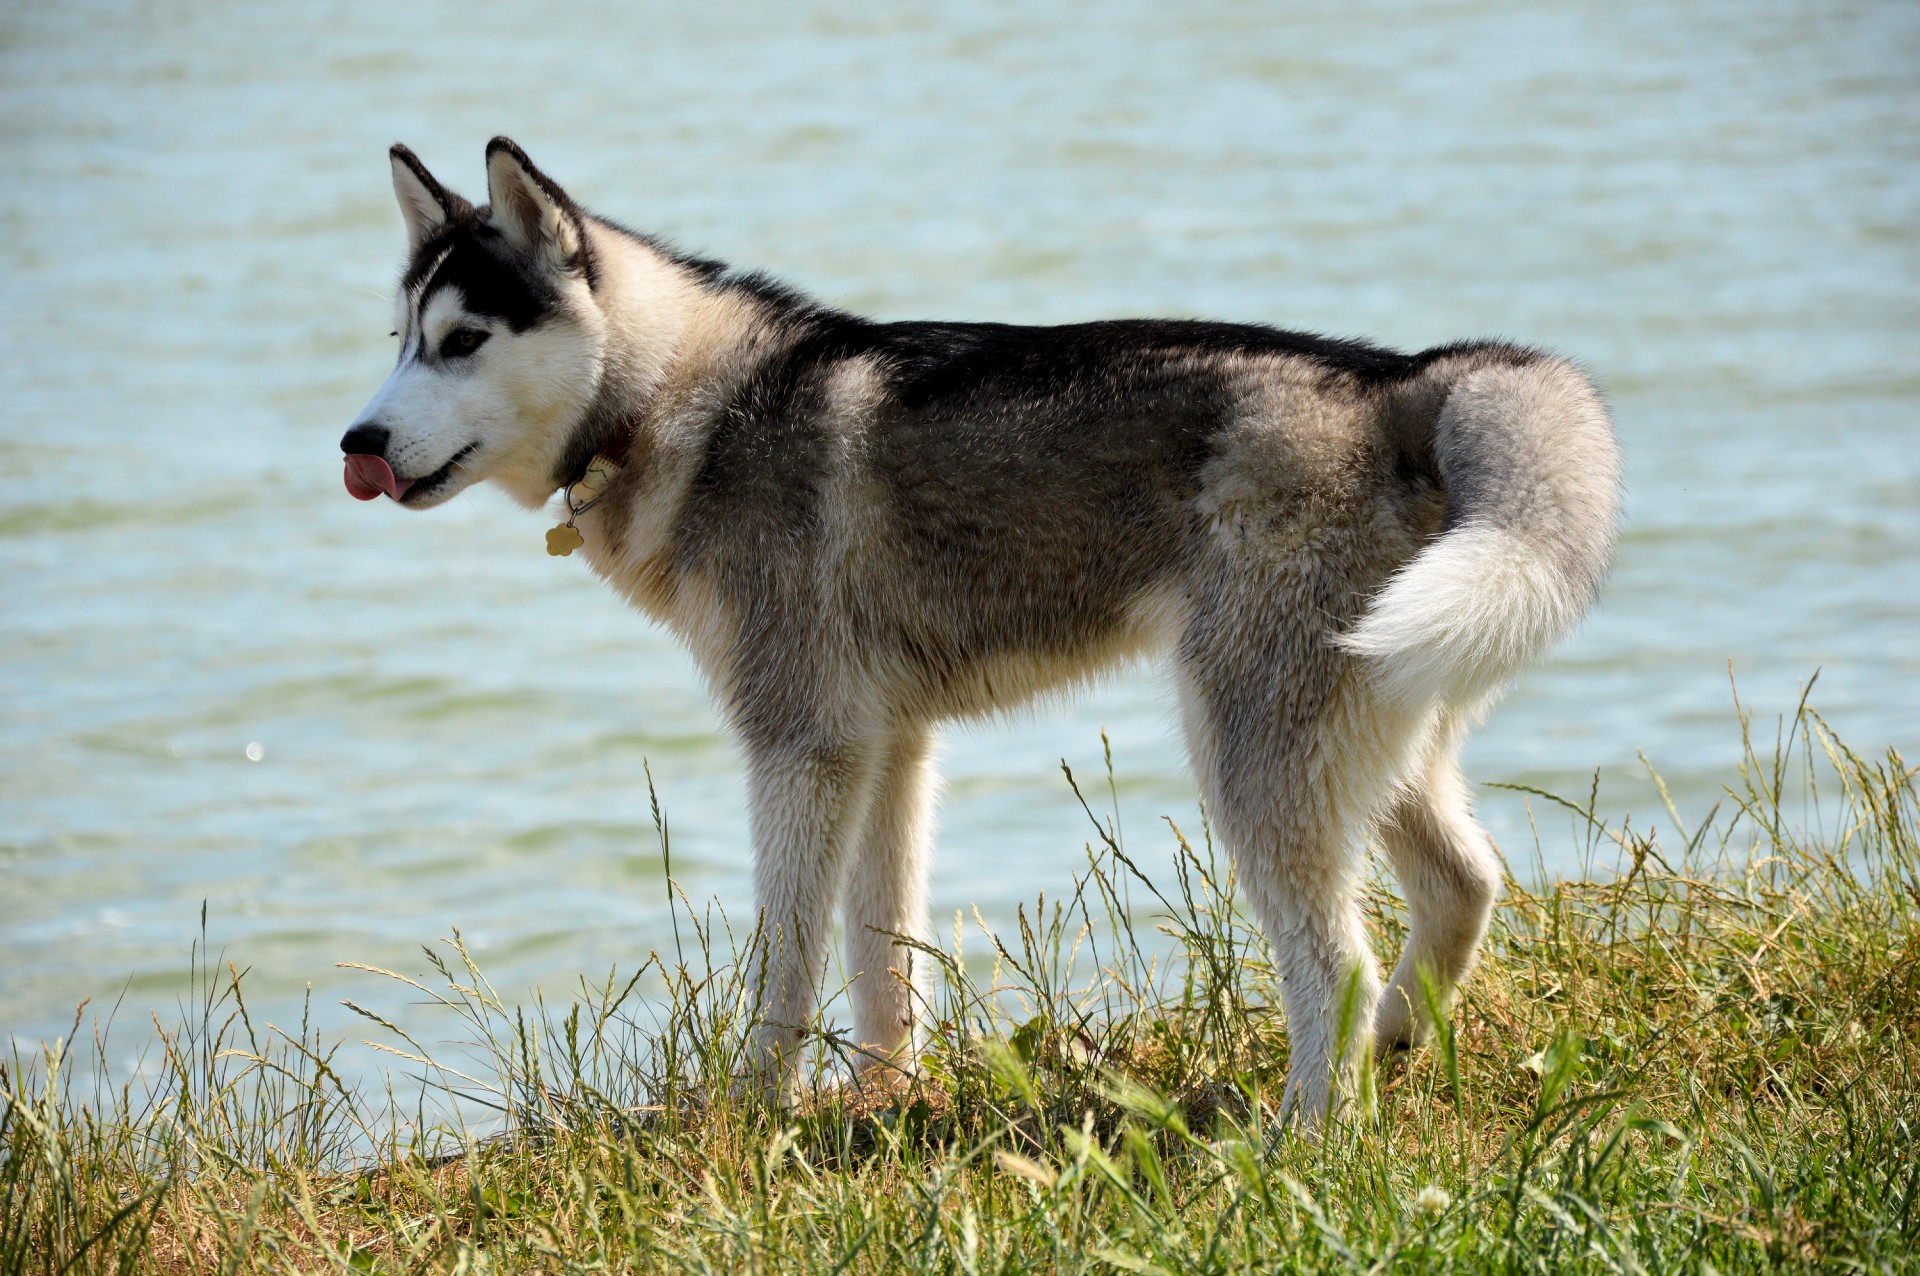 Cover art: A grown husky standing in the grass on a river bank, as if he is thinking about taking a swim. It is a beautiful, sunny day, and the husky looks happy as he is sticking out his tongue. His fur is black on the back and changes to light gray towards the legs. His face is mostly white, with a black forehead. His neck has white and dark parts.